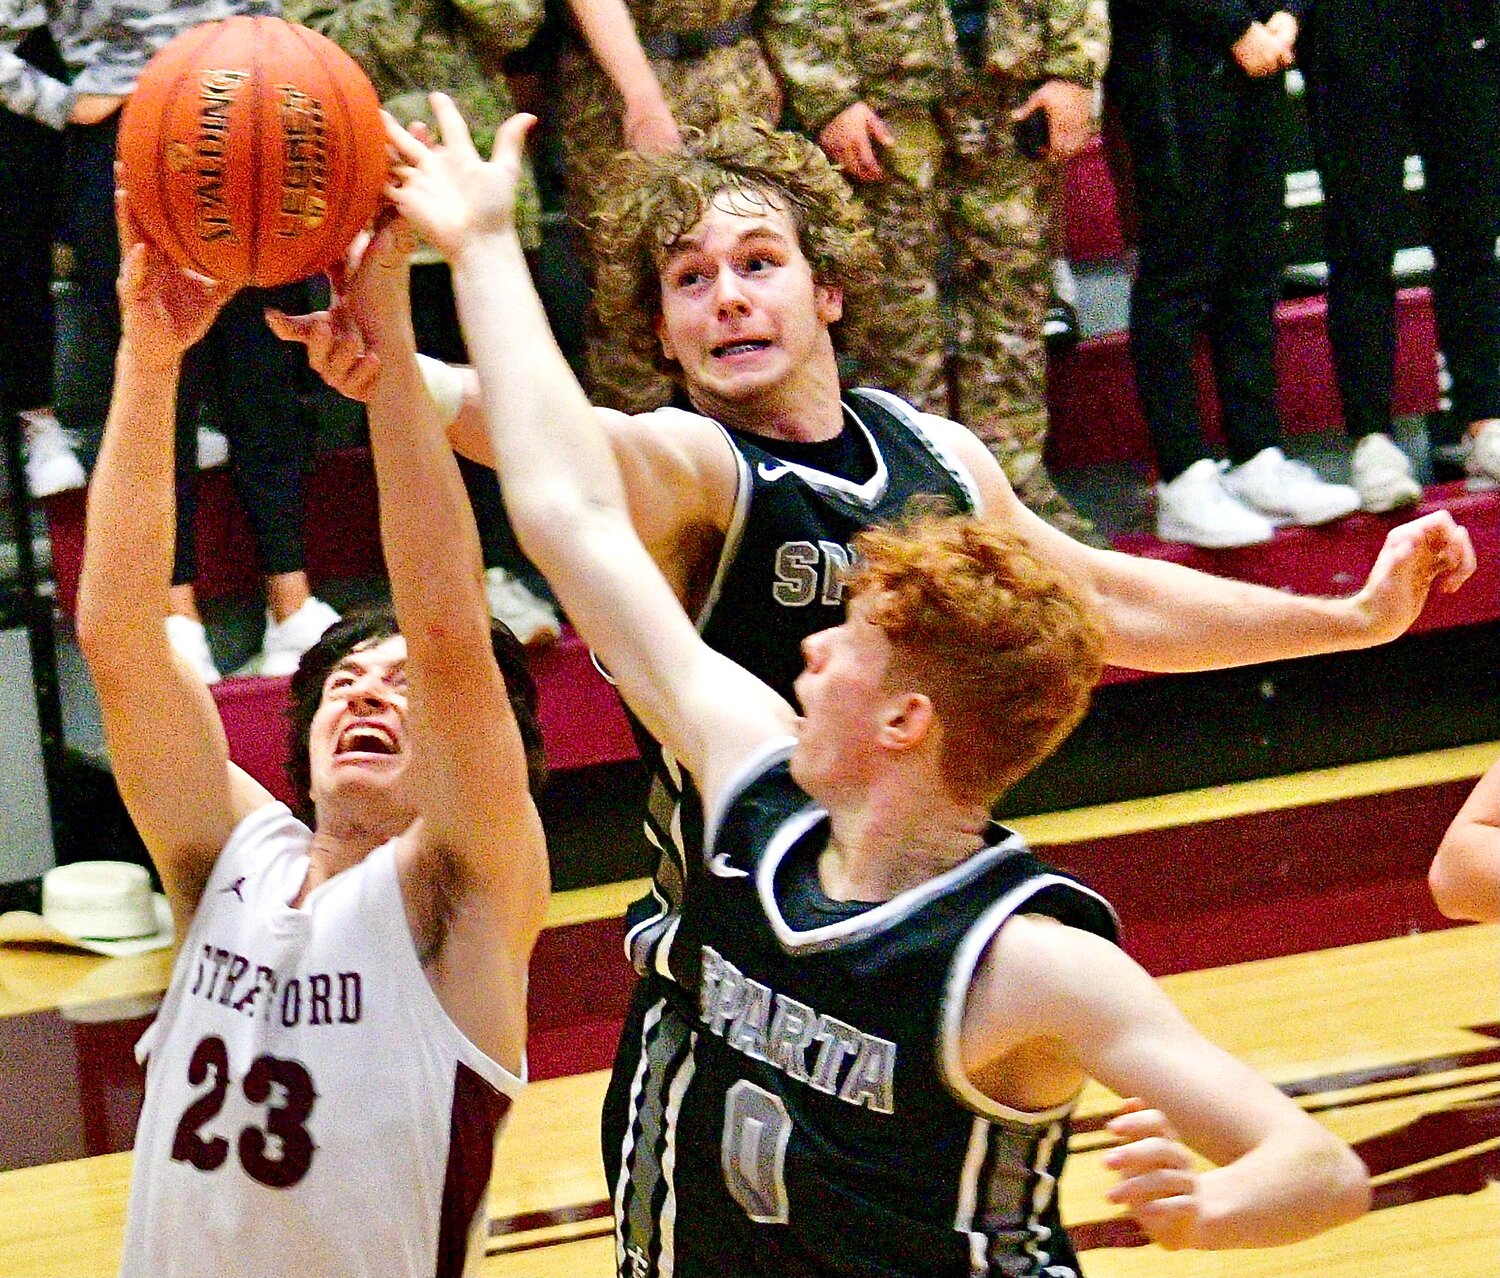 SPARTA'S JAKE LAFFERTY AND ROWDY BALL battle a Strafford player for a rebound.